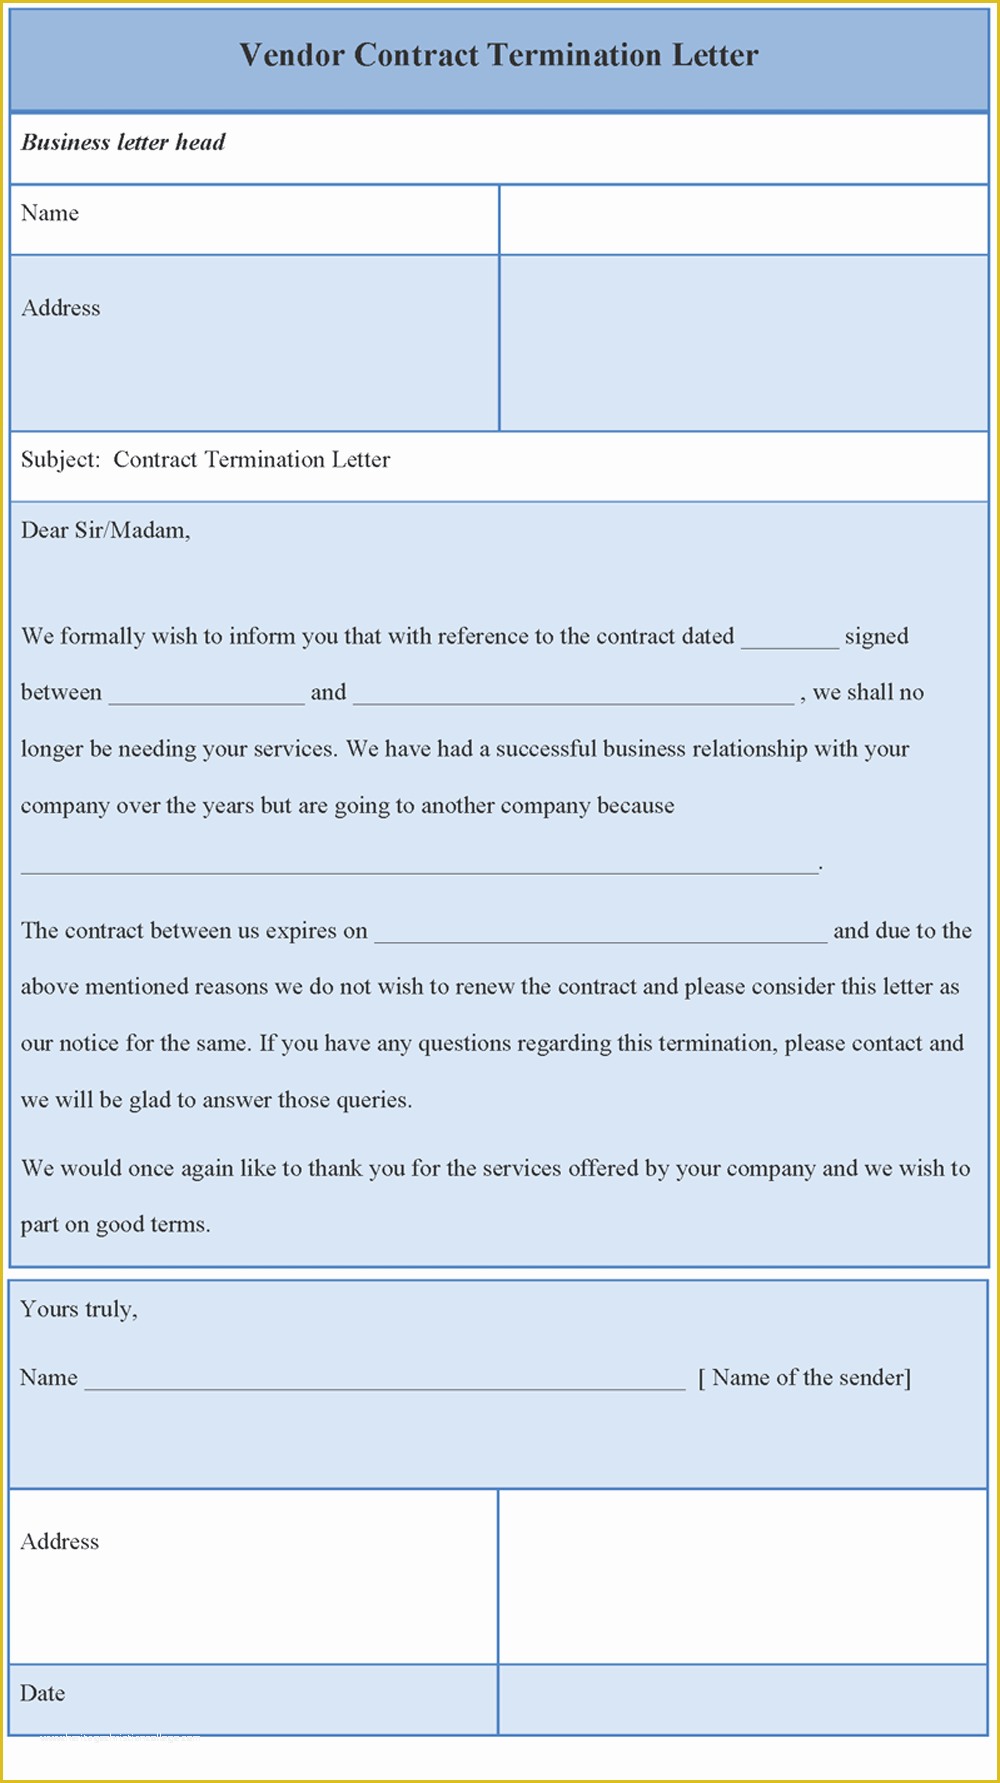 Termination Letter Template Free Of Vendor Contract Termination Letter Sample Of Vendor